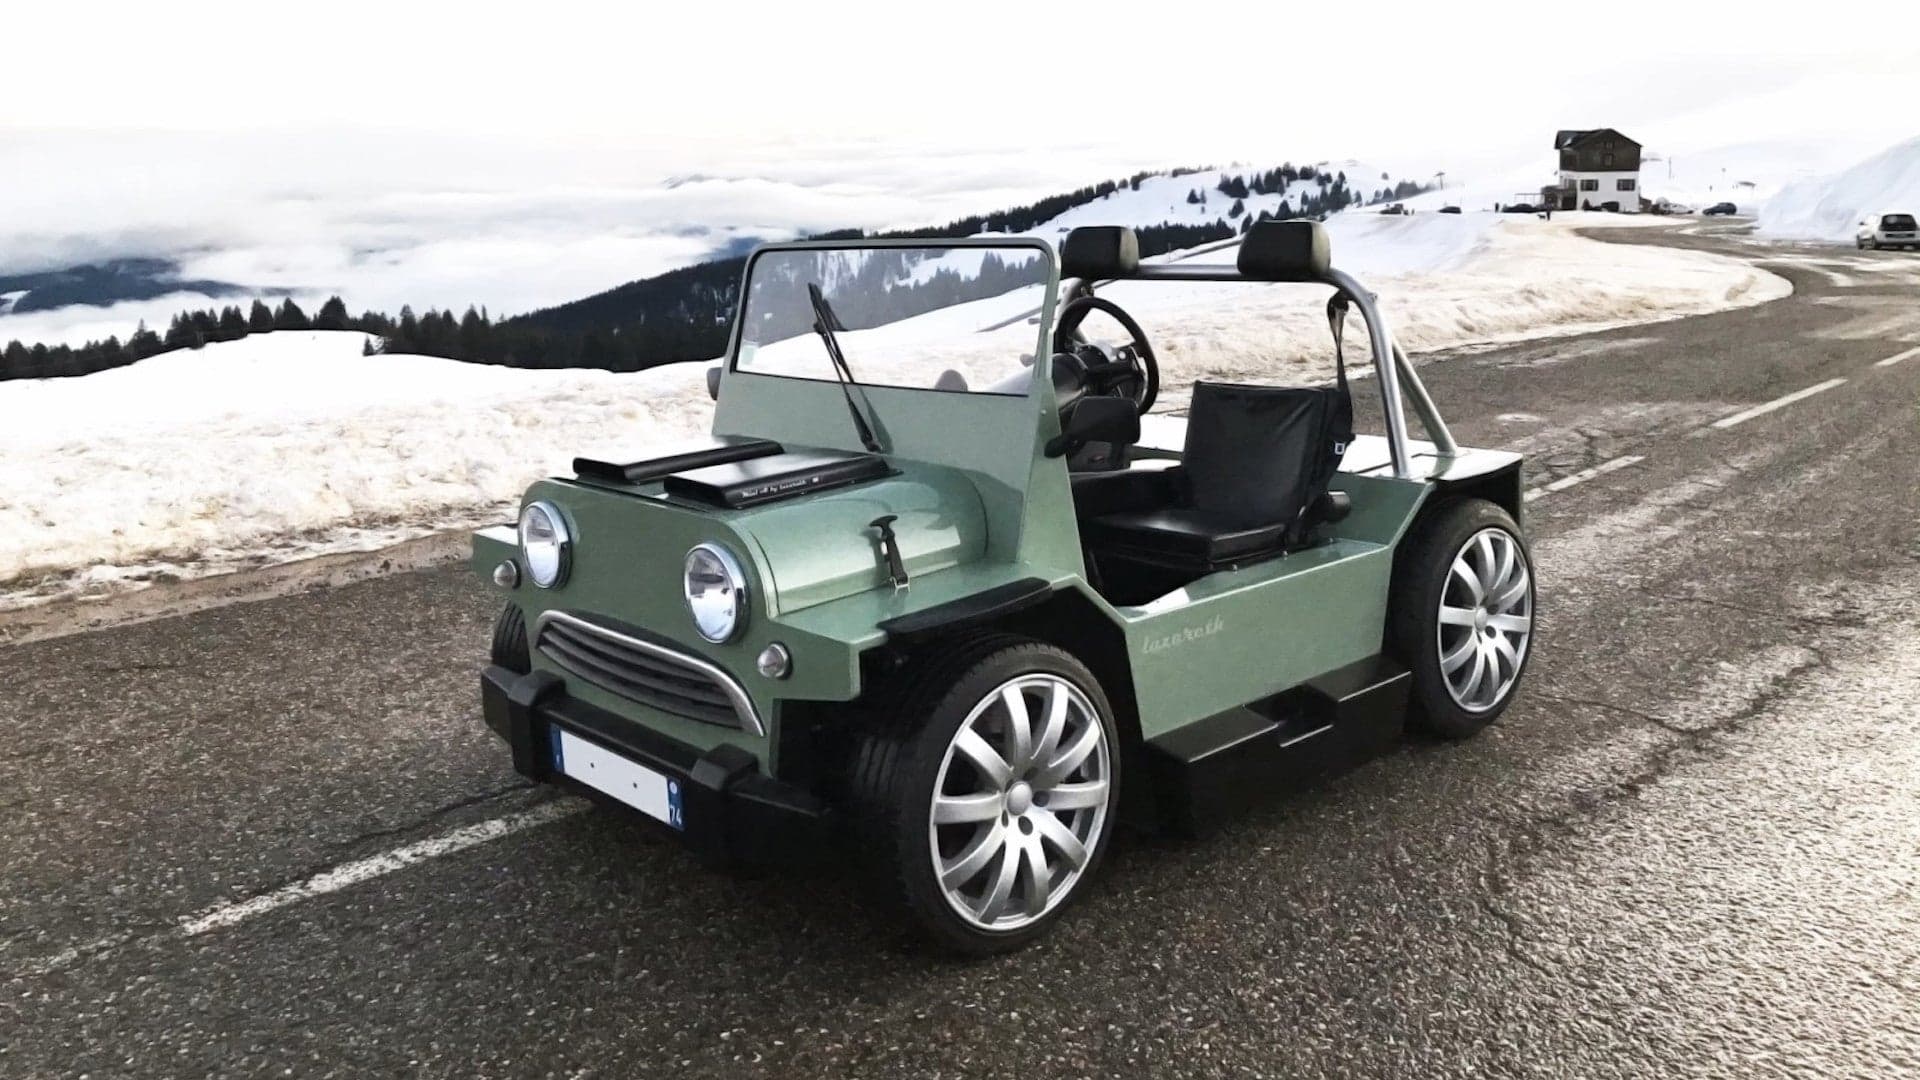 Maserati V8-Swapped Mini Moke Has 454 HP and Weighs 1,874 Pounds